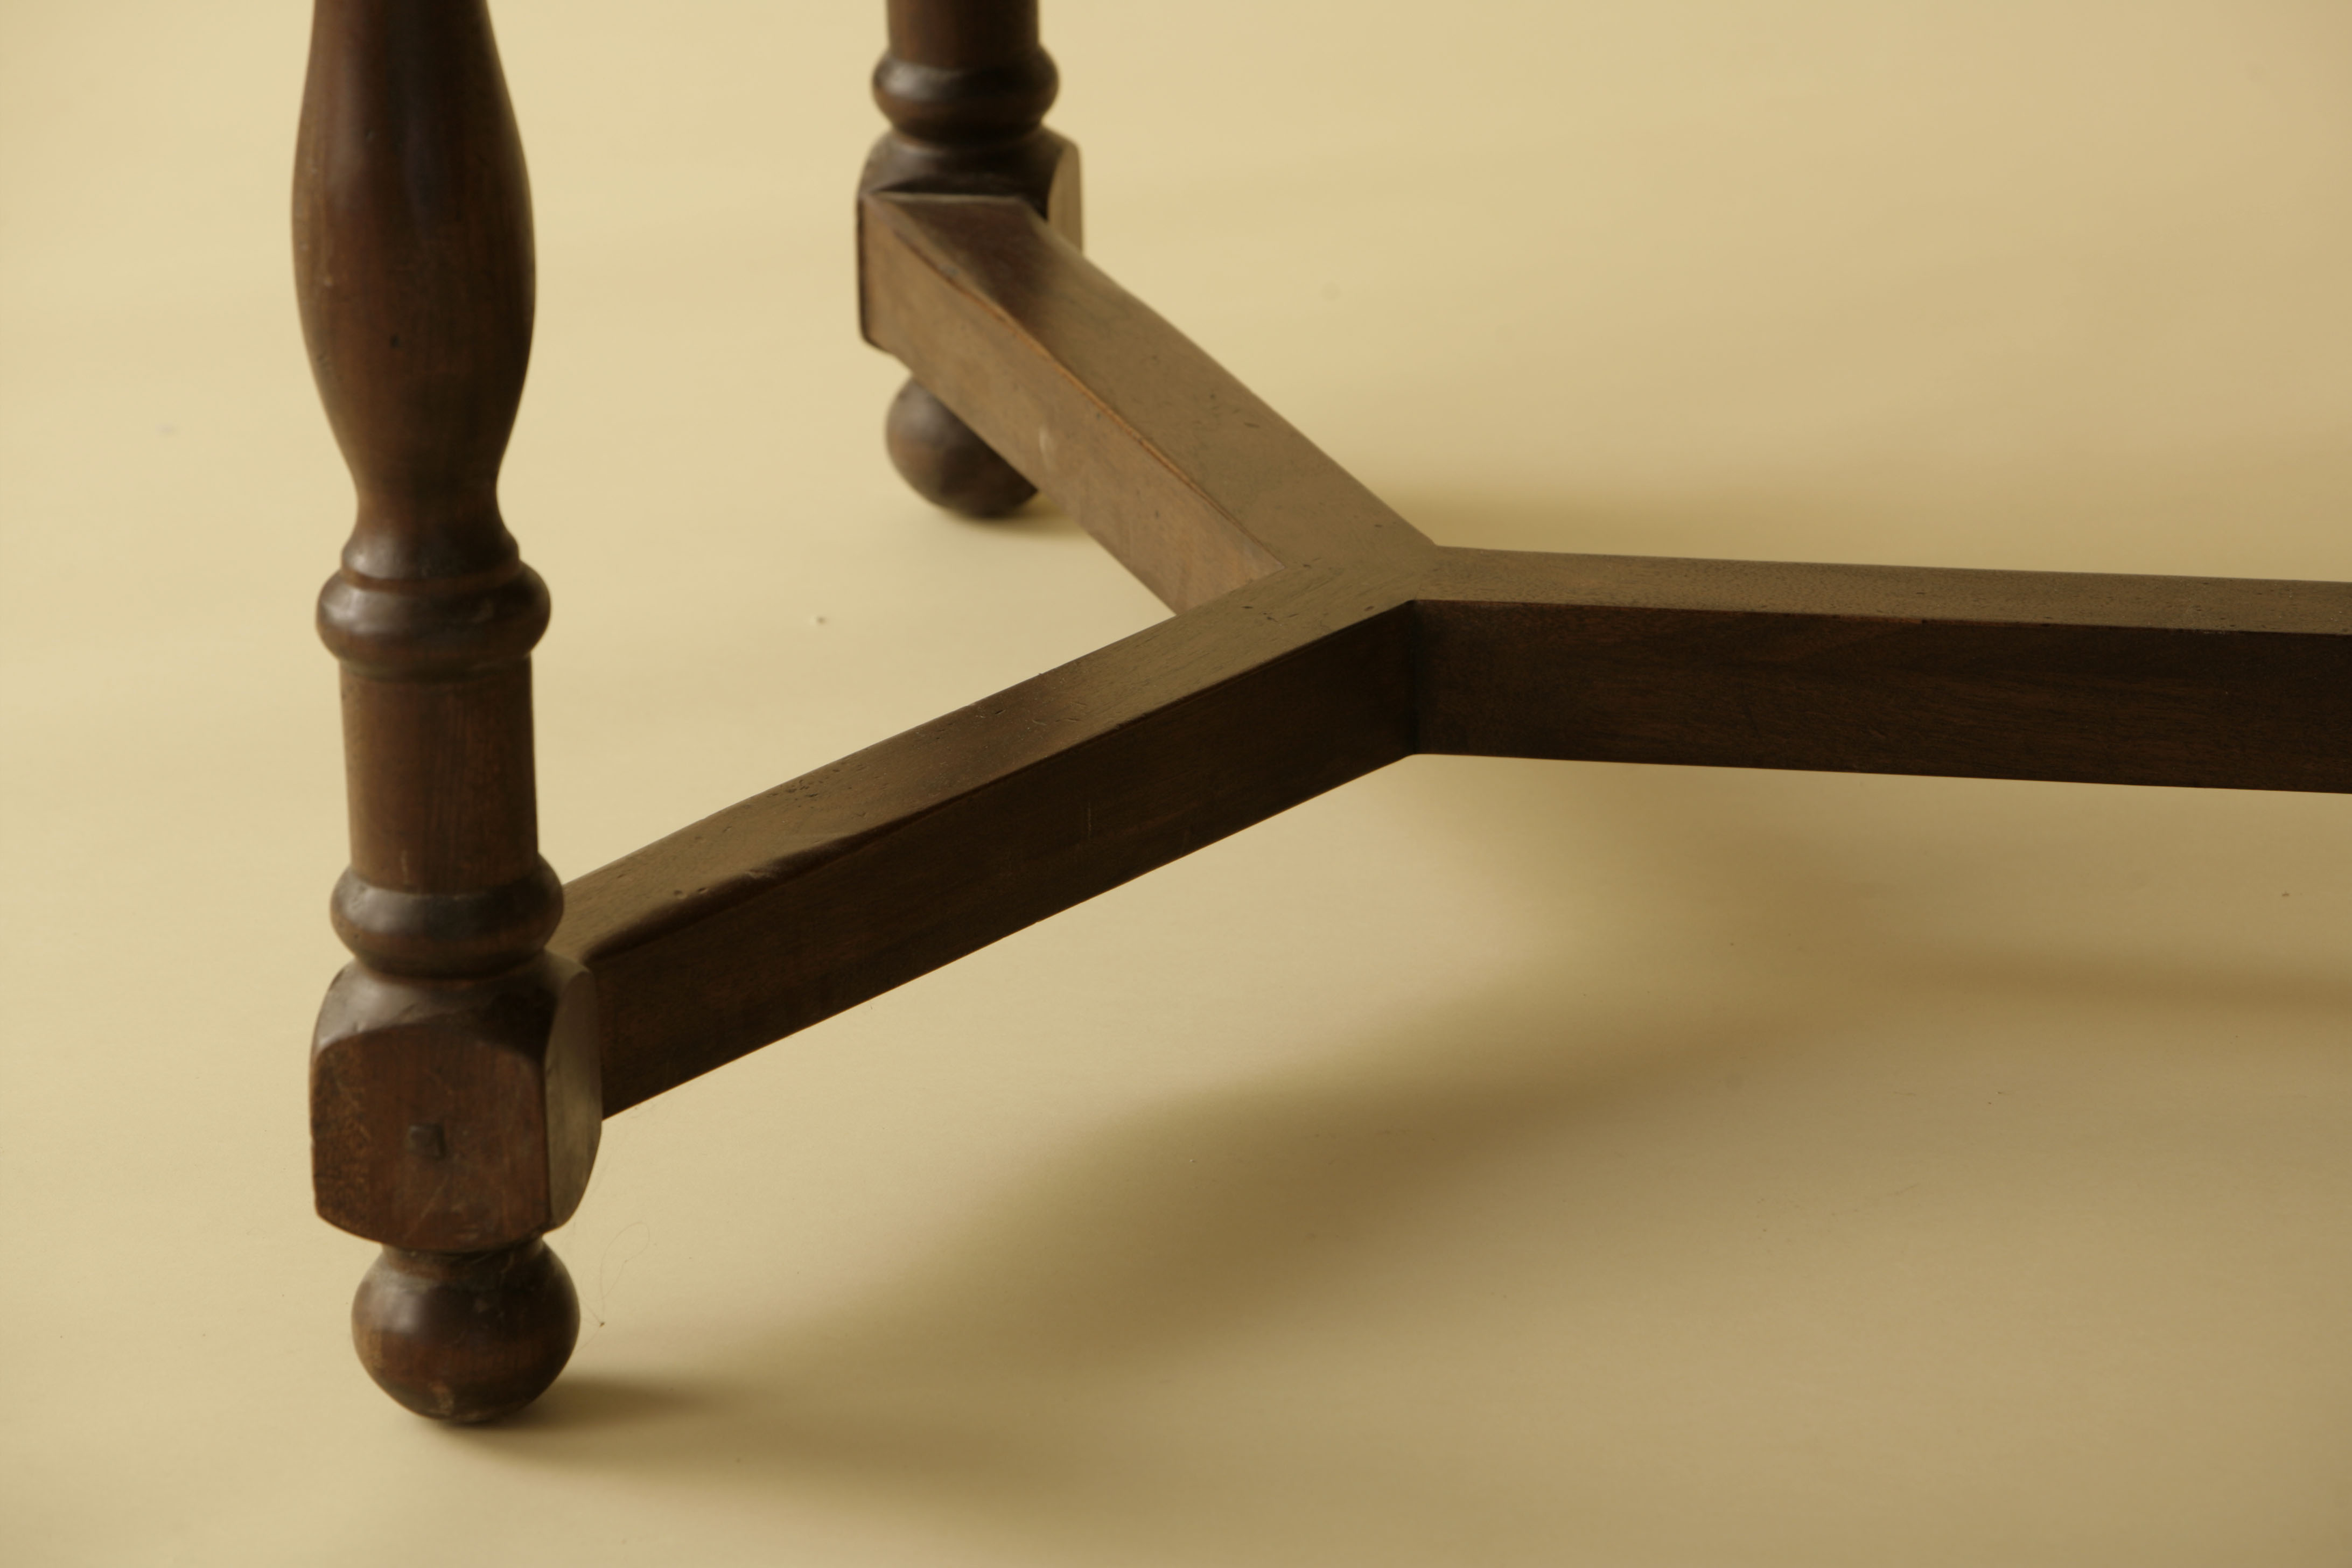 Oval Y Stretcher Table